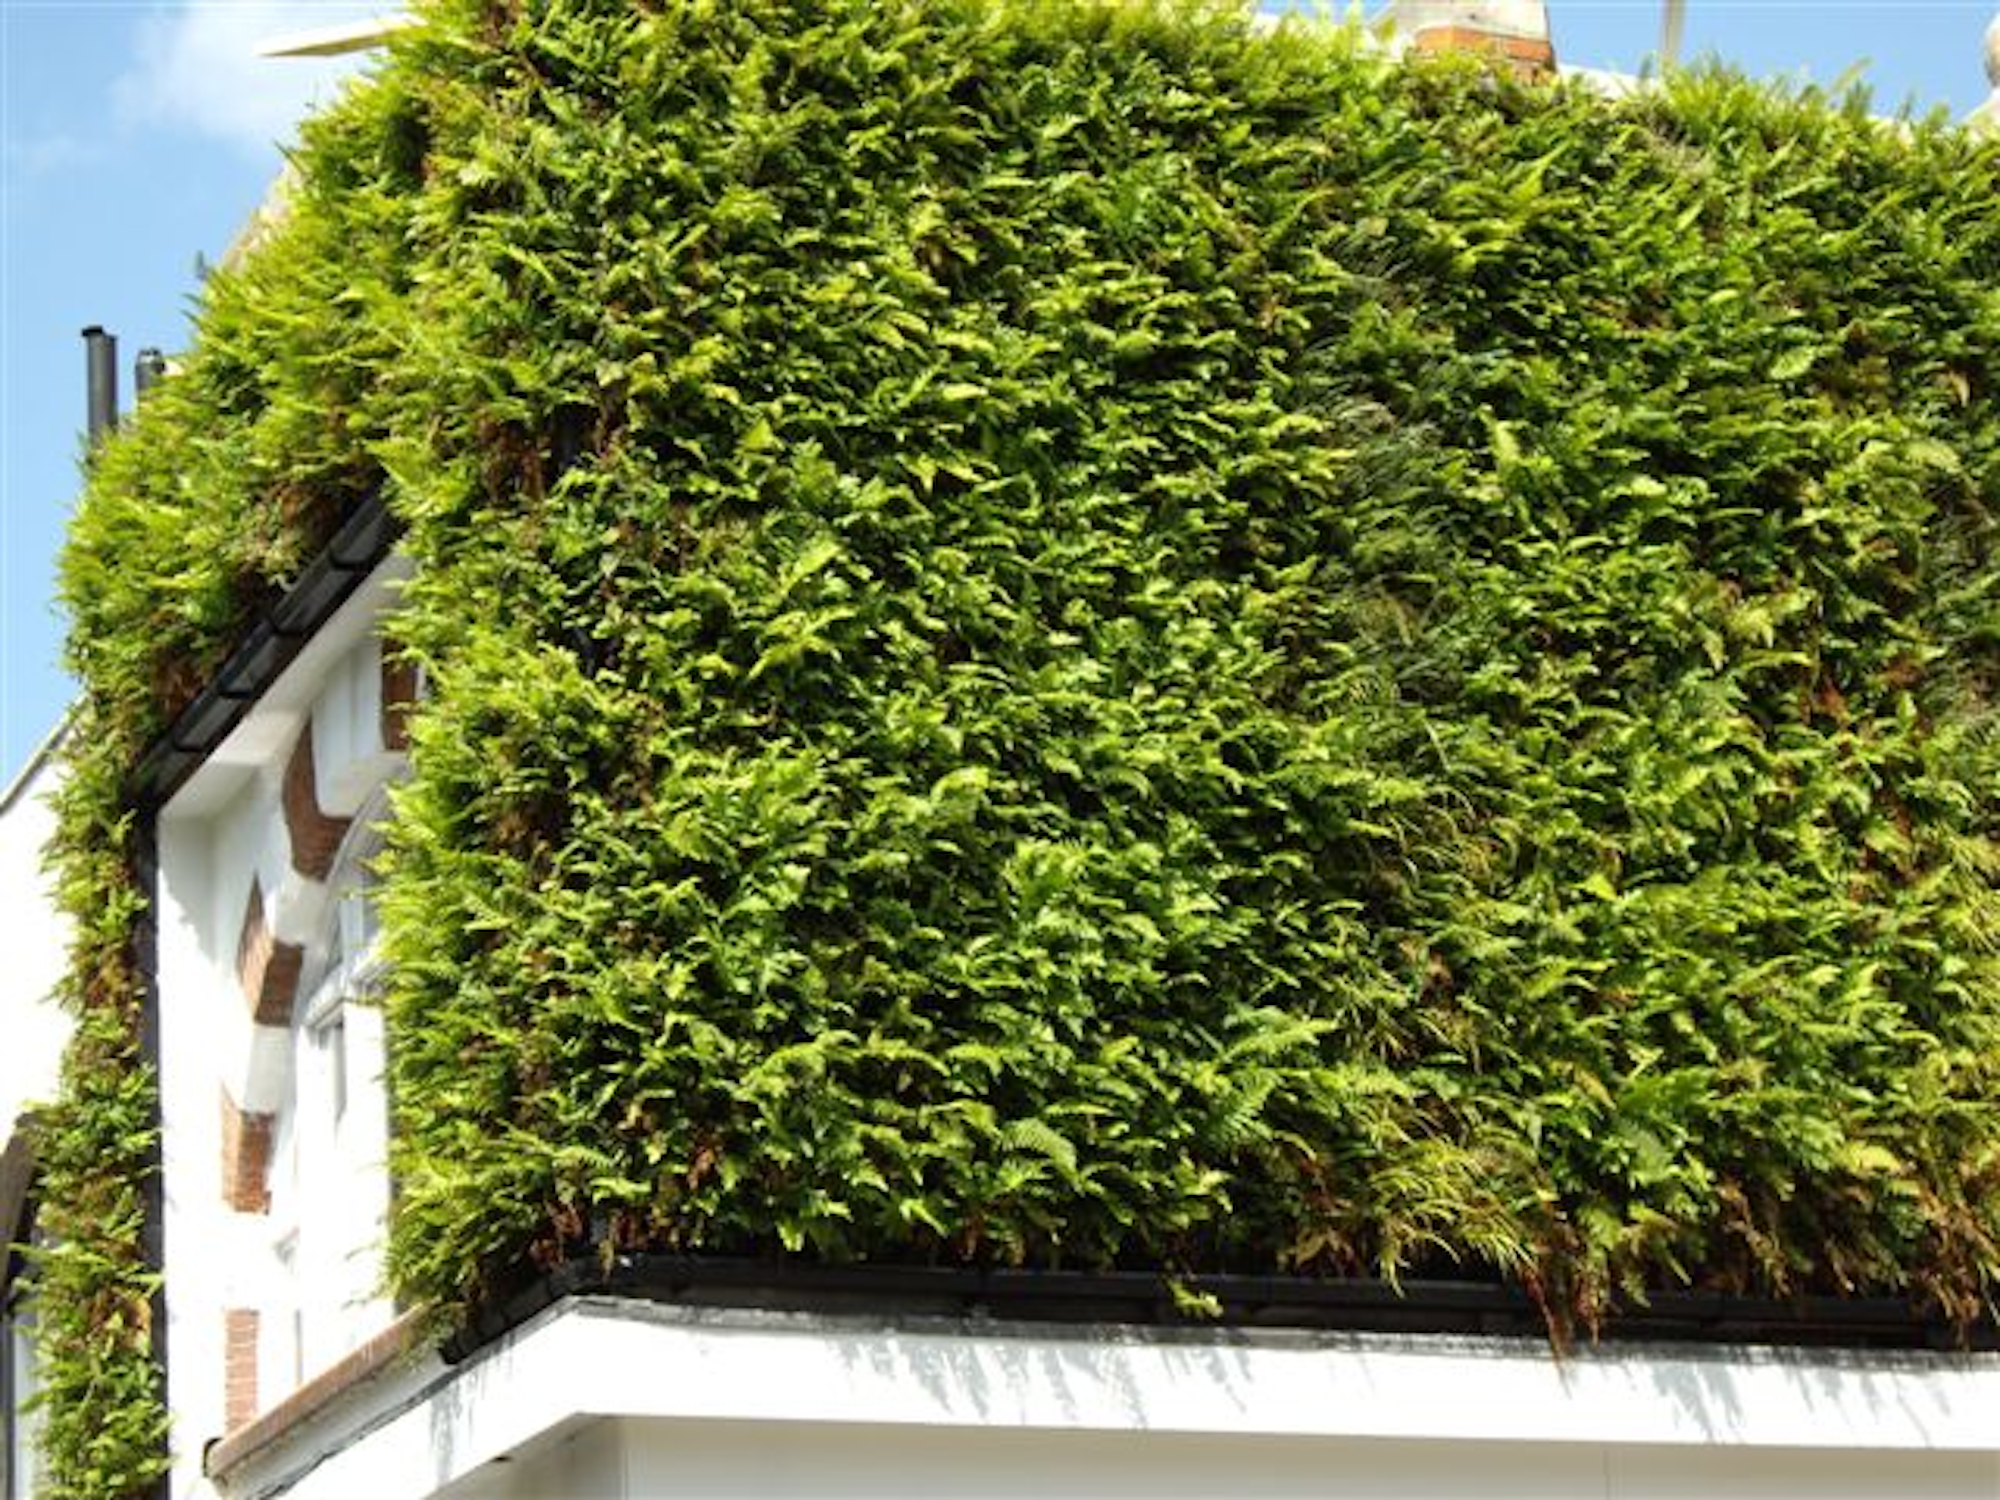 lush natural green wall wrapping round upper level of a building